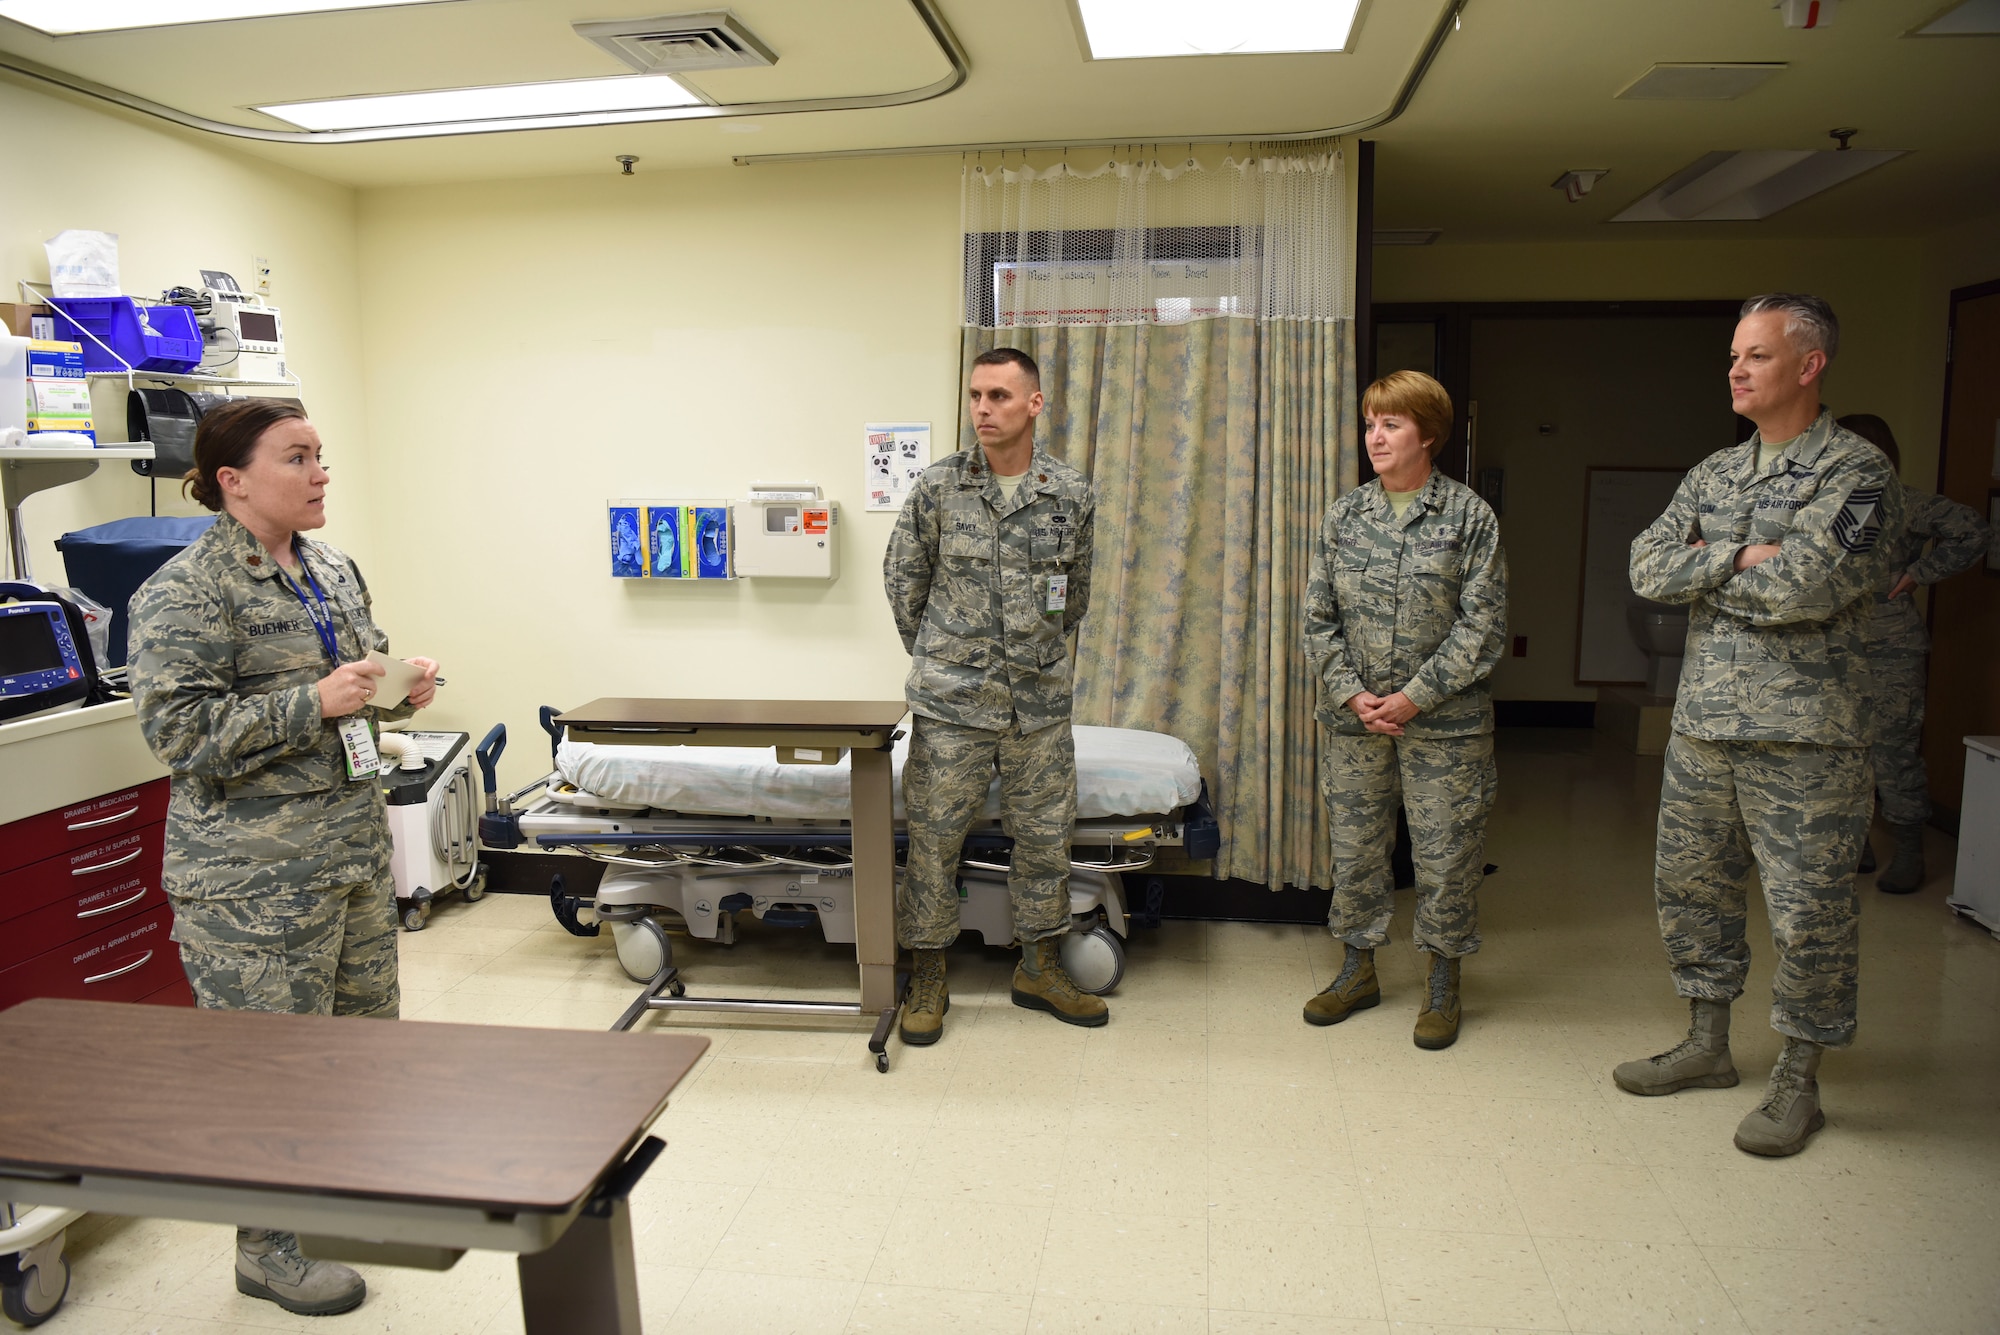 U.S. Air Force Maj. Michelle Buehner, left, 51st Medical Operation Squadron general surgeon, and U.S. Air Force Maj. Douglas Savey, center, 51st Medical Operation Squadron certified registered nurse anesthetist, brief U.S. Air Force Lt. Gen. Dorothy Hogg, Air Force Surgeon General, and U.S. Air Force Chief Master Sgt. Steven Cum, Medical Enlisted Force and Enlisted Corps chief, about the functions of the operating room at Osan Air Base, Republic of Korea, Sept. 24, 2018.